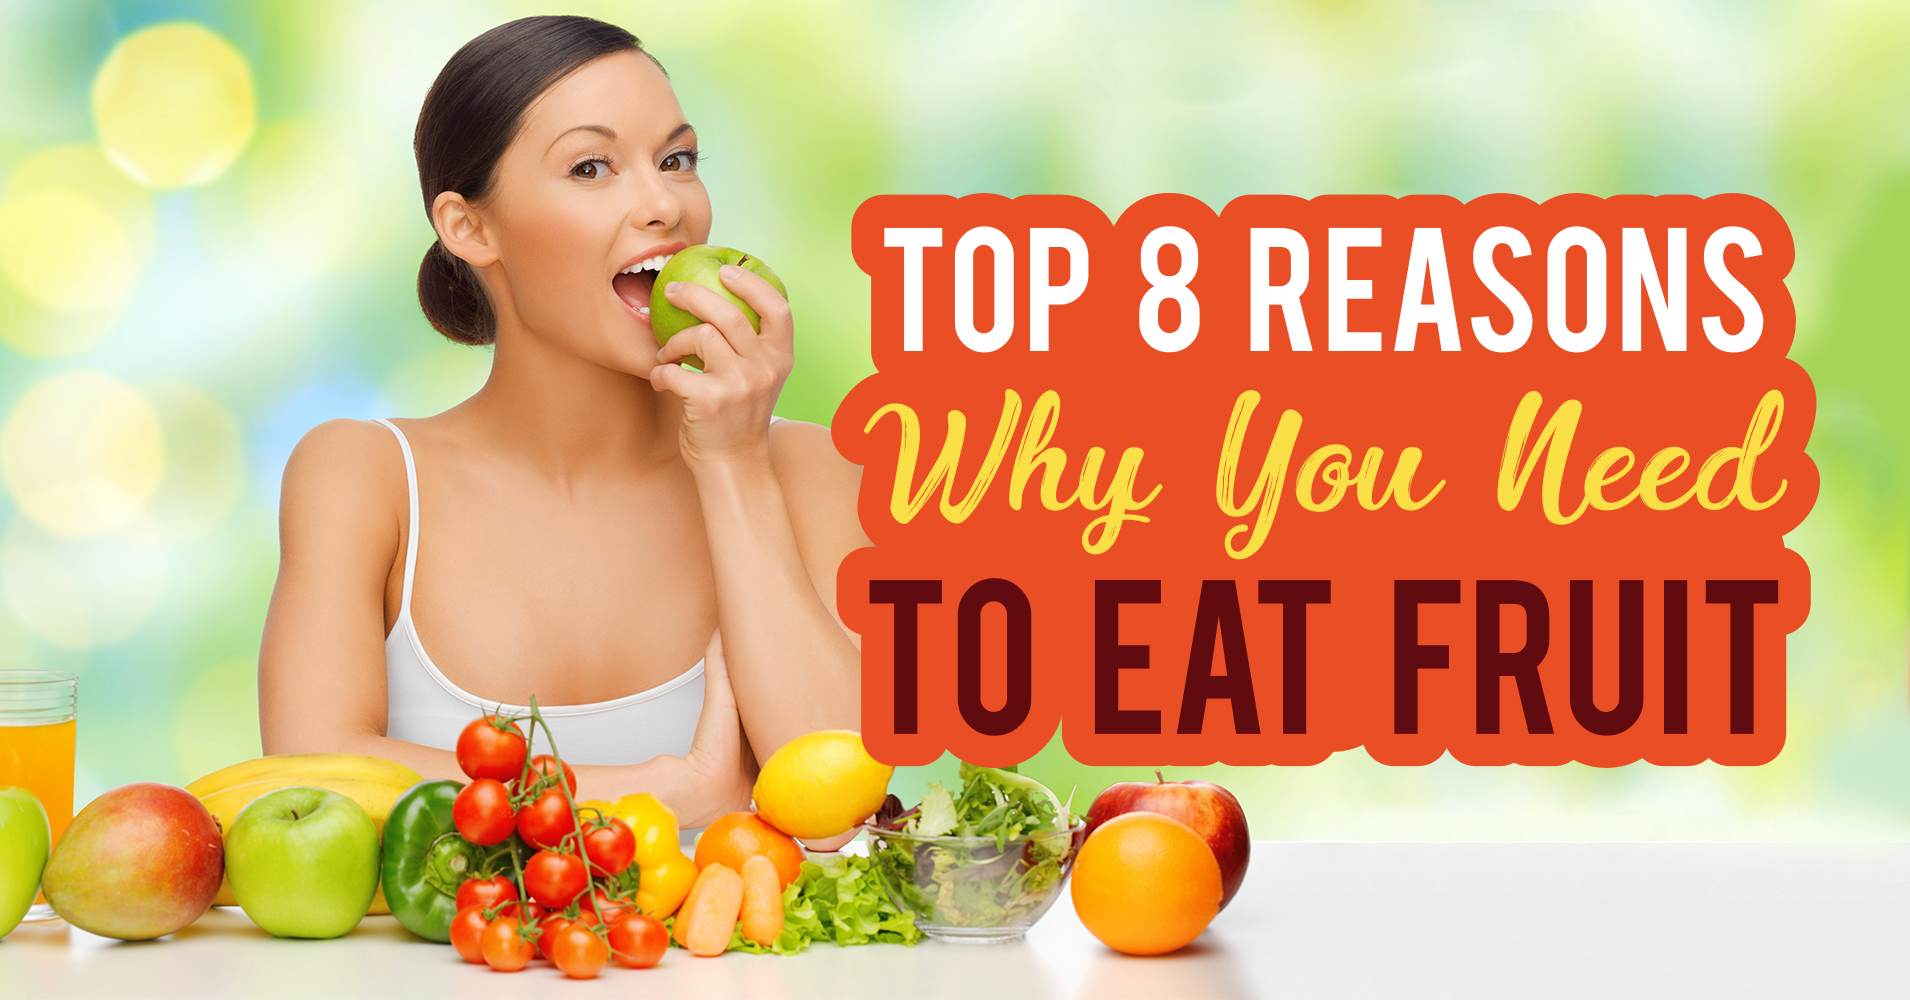 Top 8 Reasons Why You Need To Eat Fruit Article